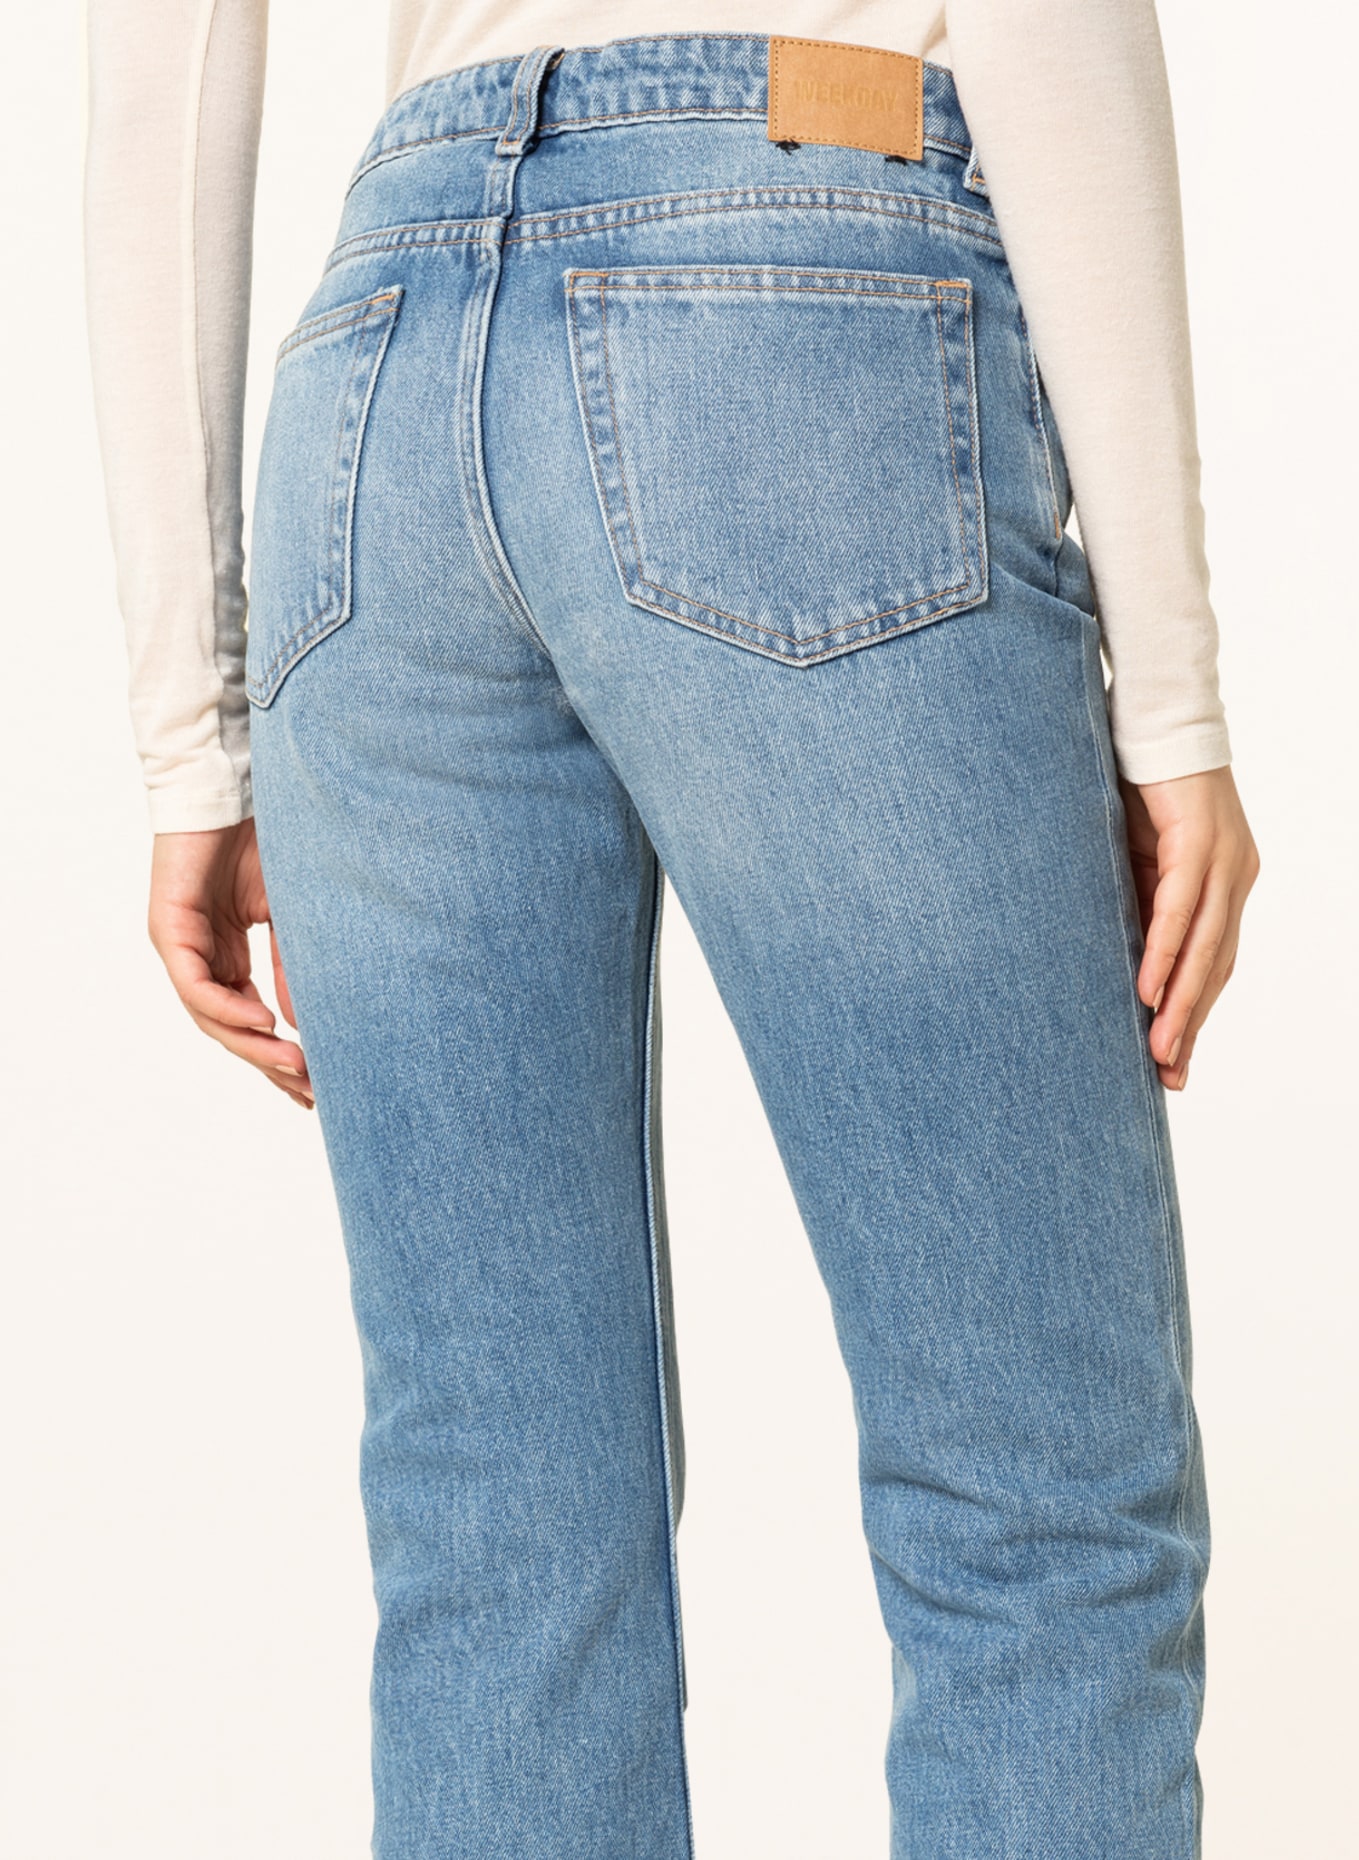 WEEKDAY Straight jeans, Color: Blue Medium dusty (Image 5)